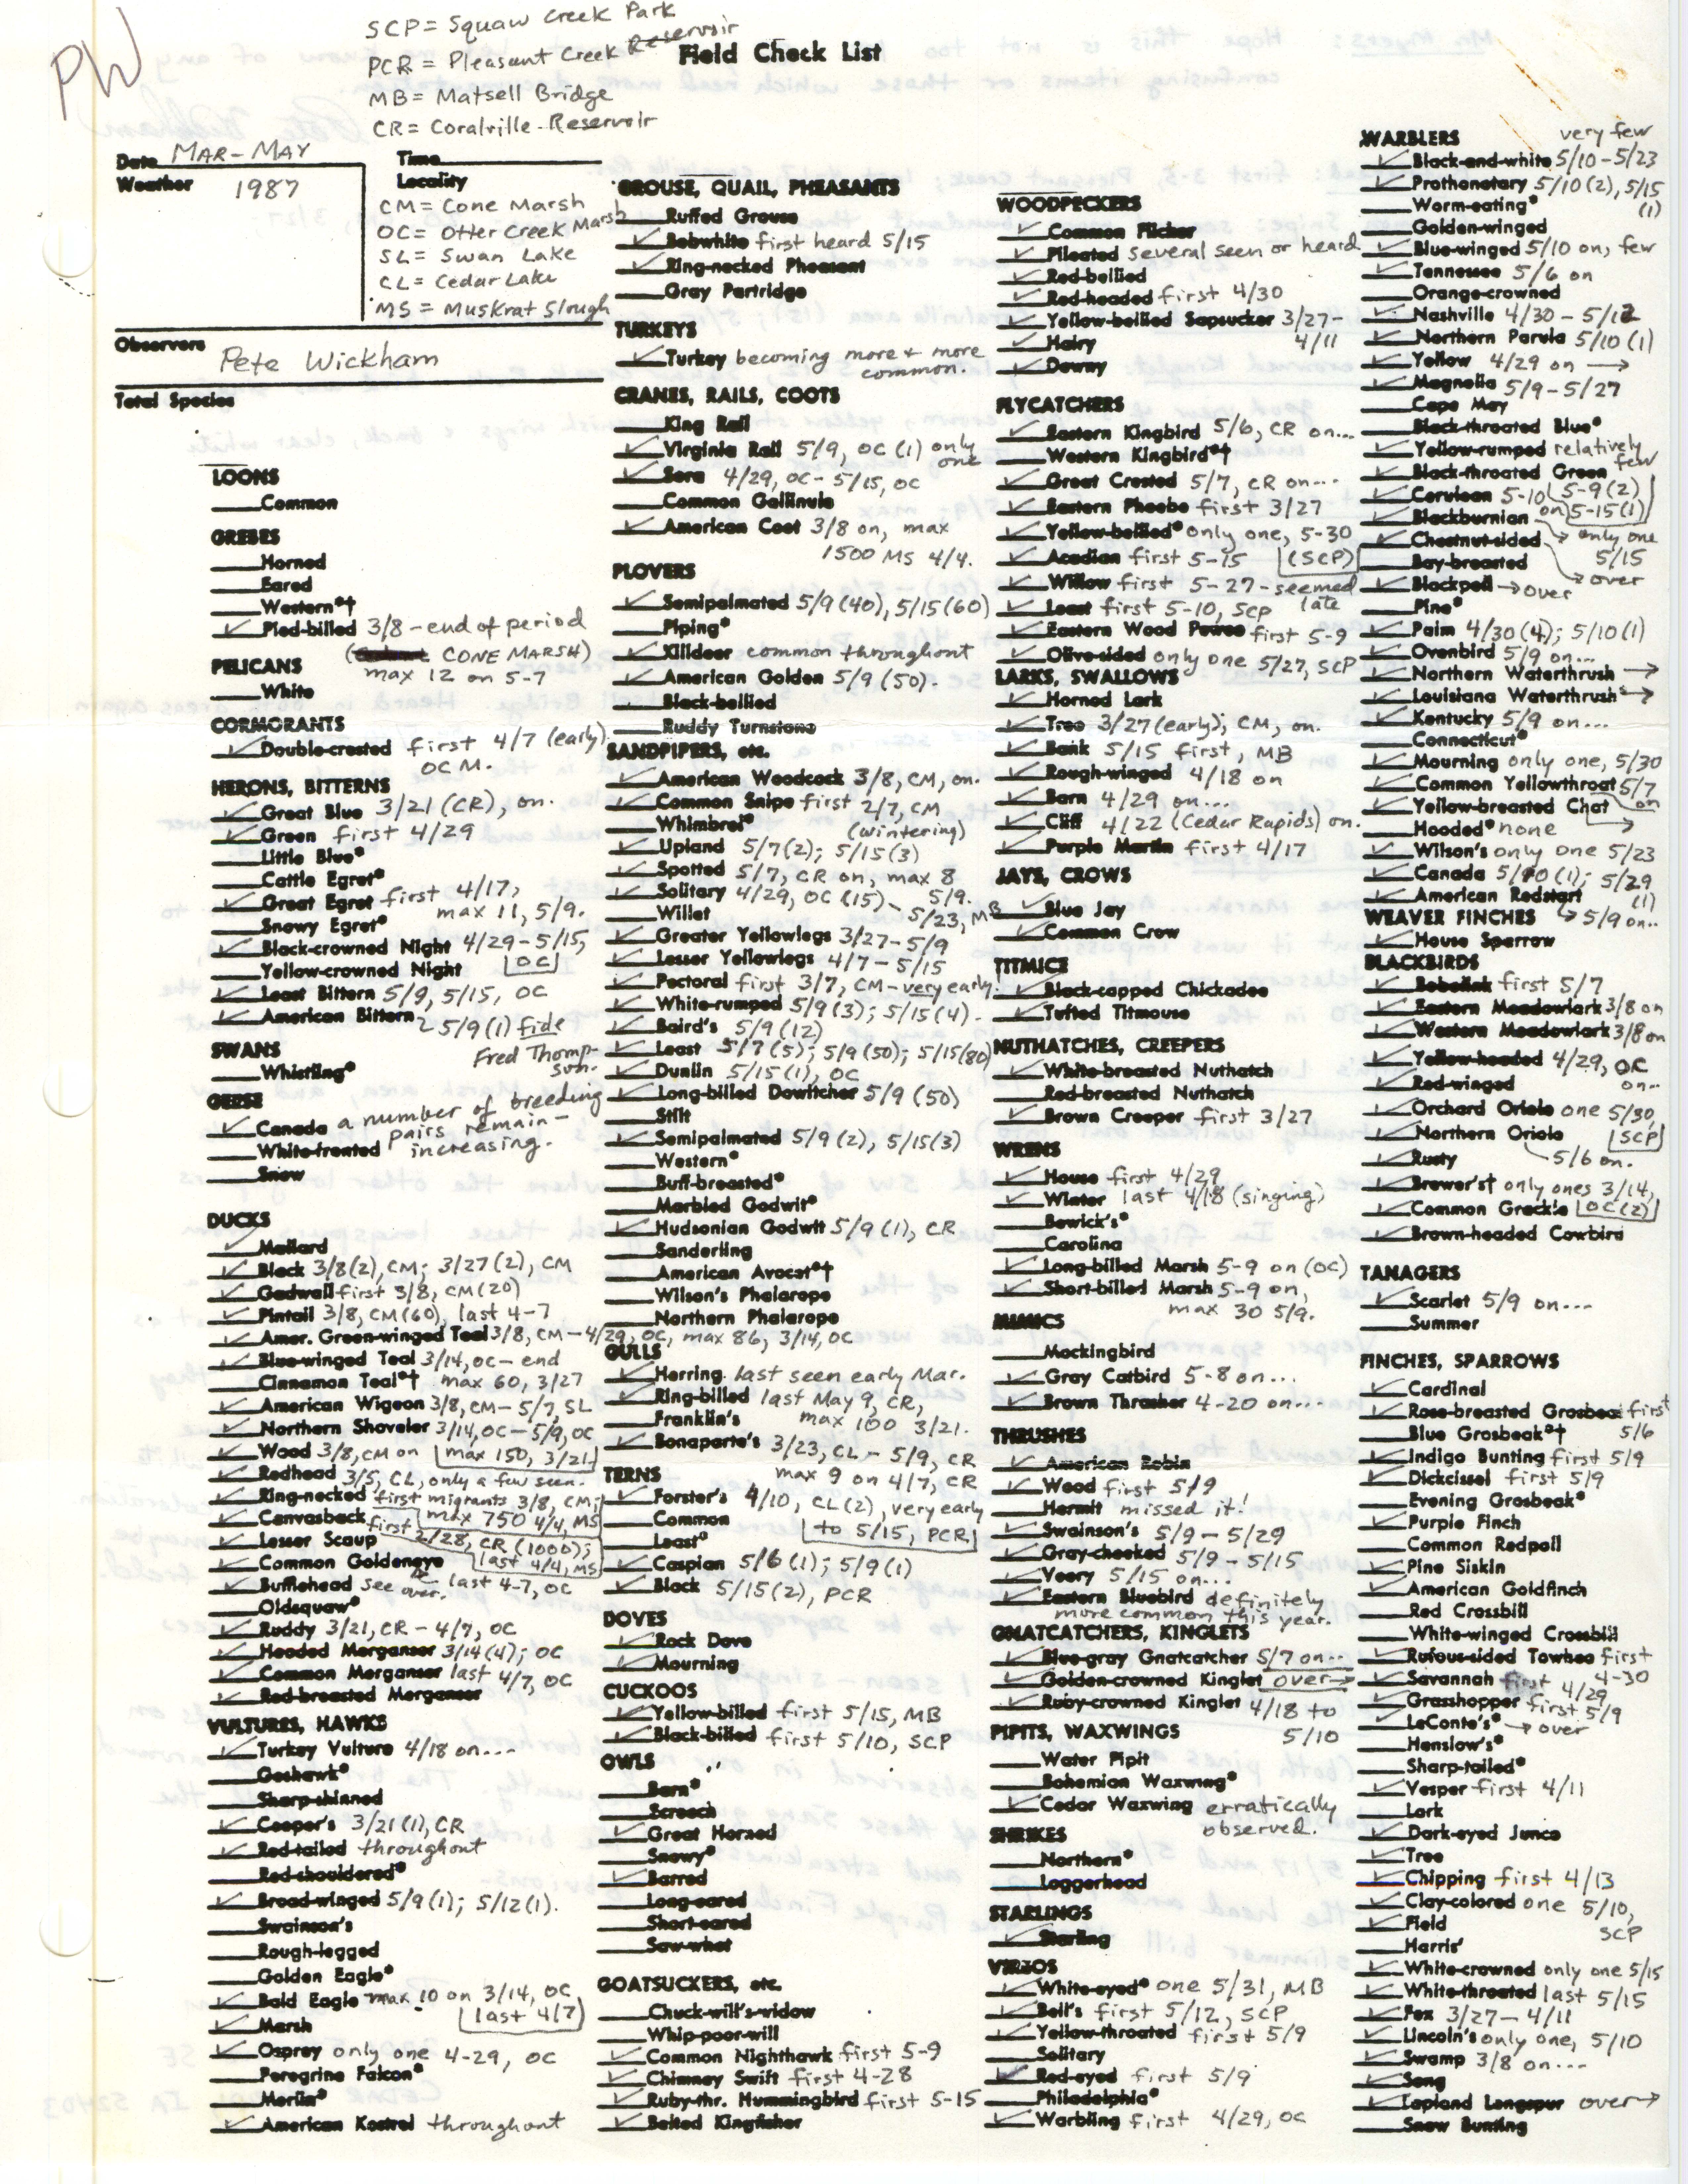 Field check list contributed by Peter P. Wickham, spring 1987